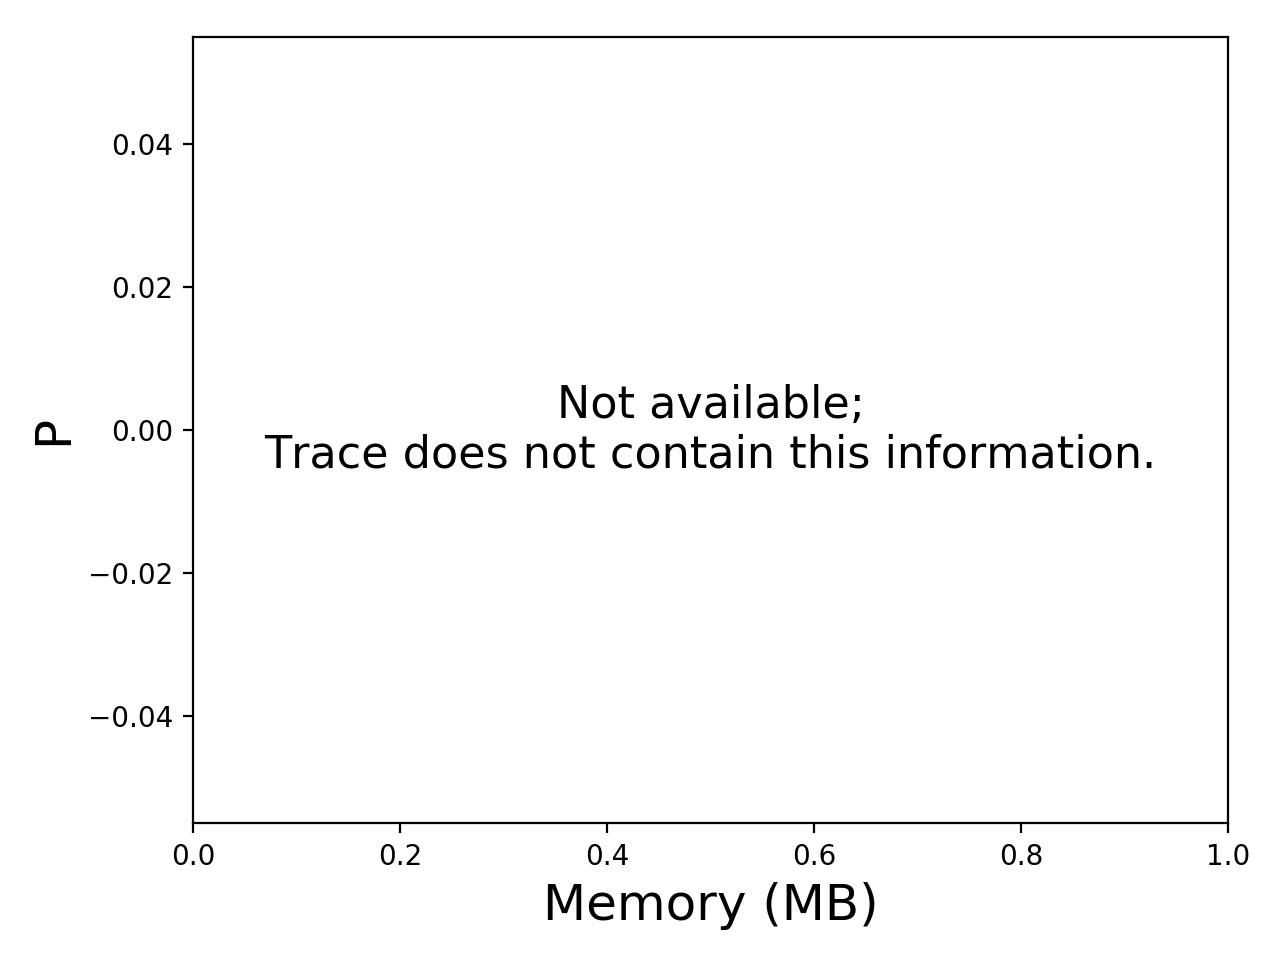 Task memory consumption graph for the Pegasus_P6b trace.